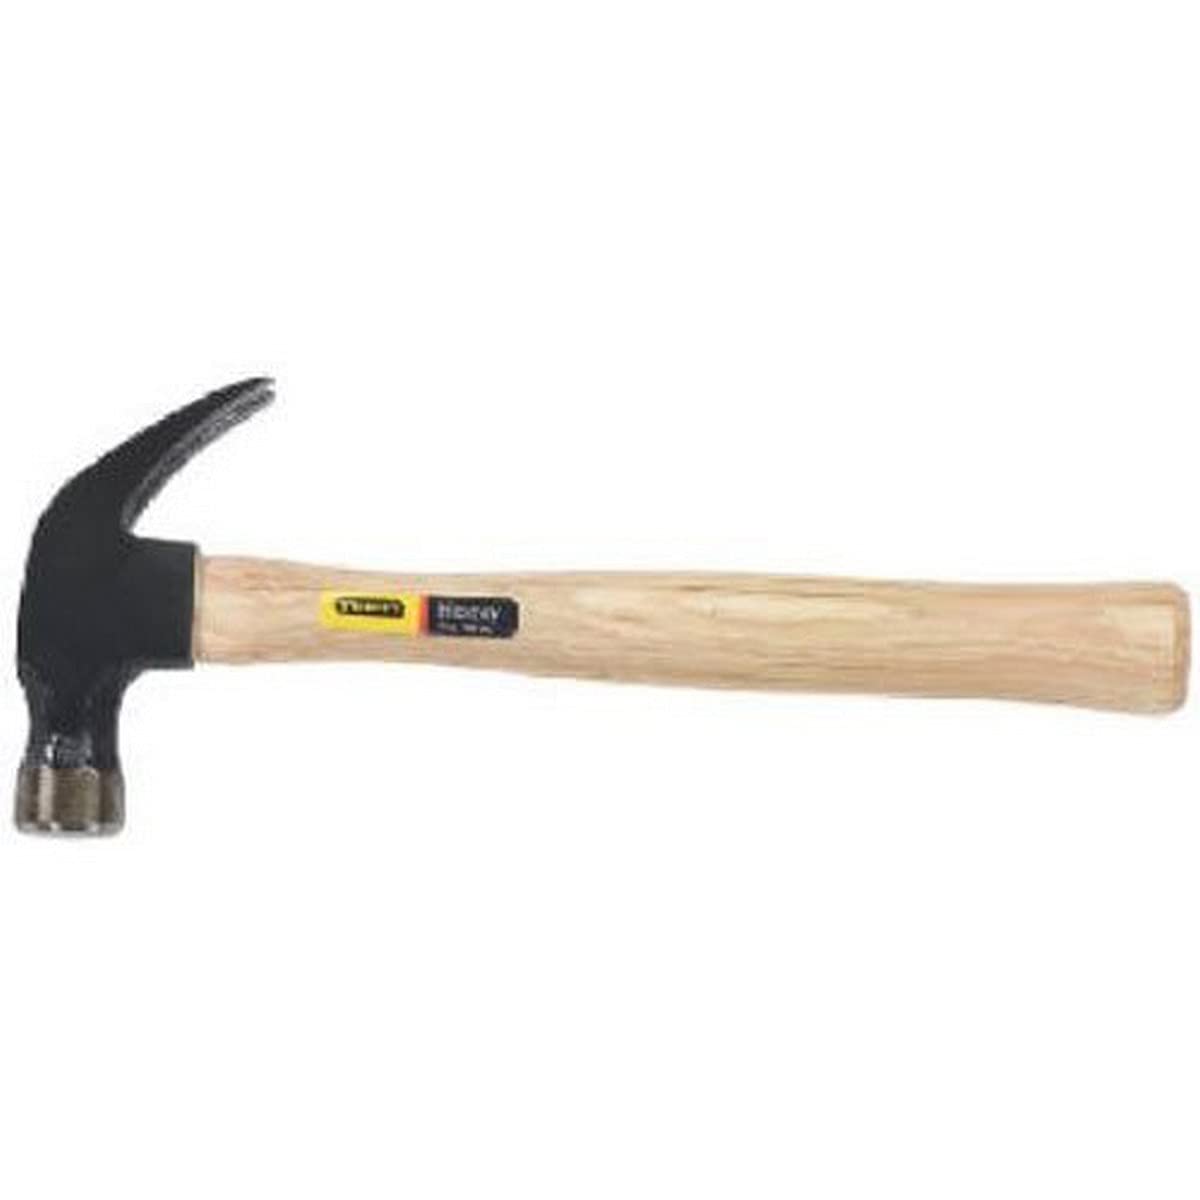 Stanley 16 Ounce Hickory Handle Nailing Hammer $8 @ Amazon